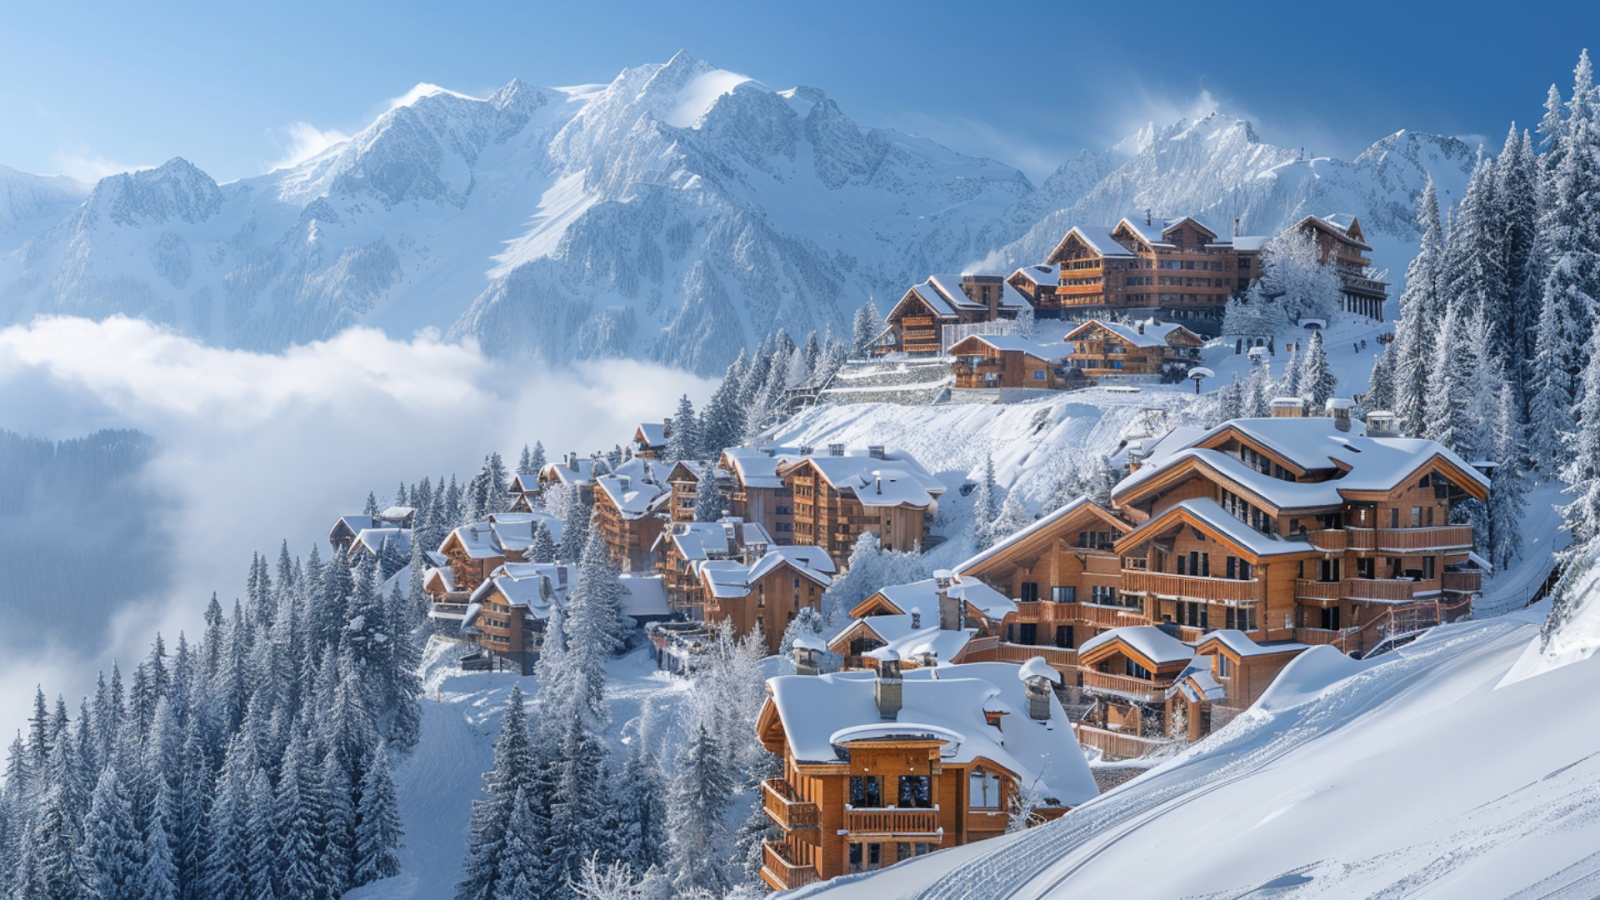 The powdery slopes of Courchevel, France, with ski chalets in the background